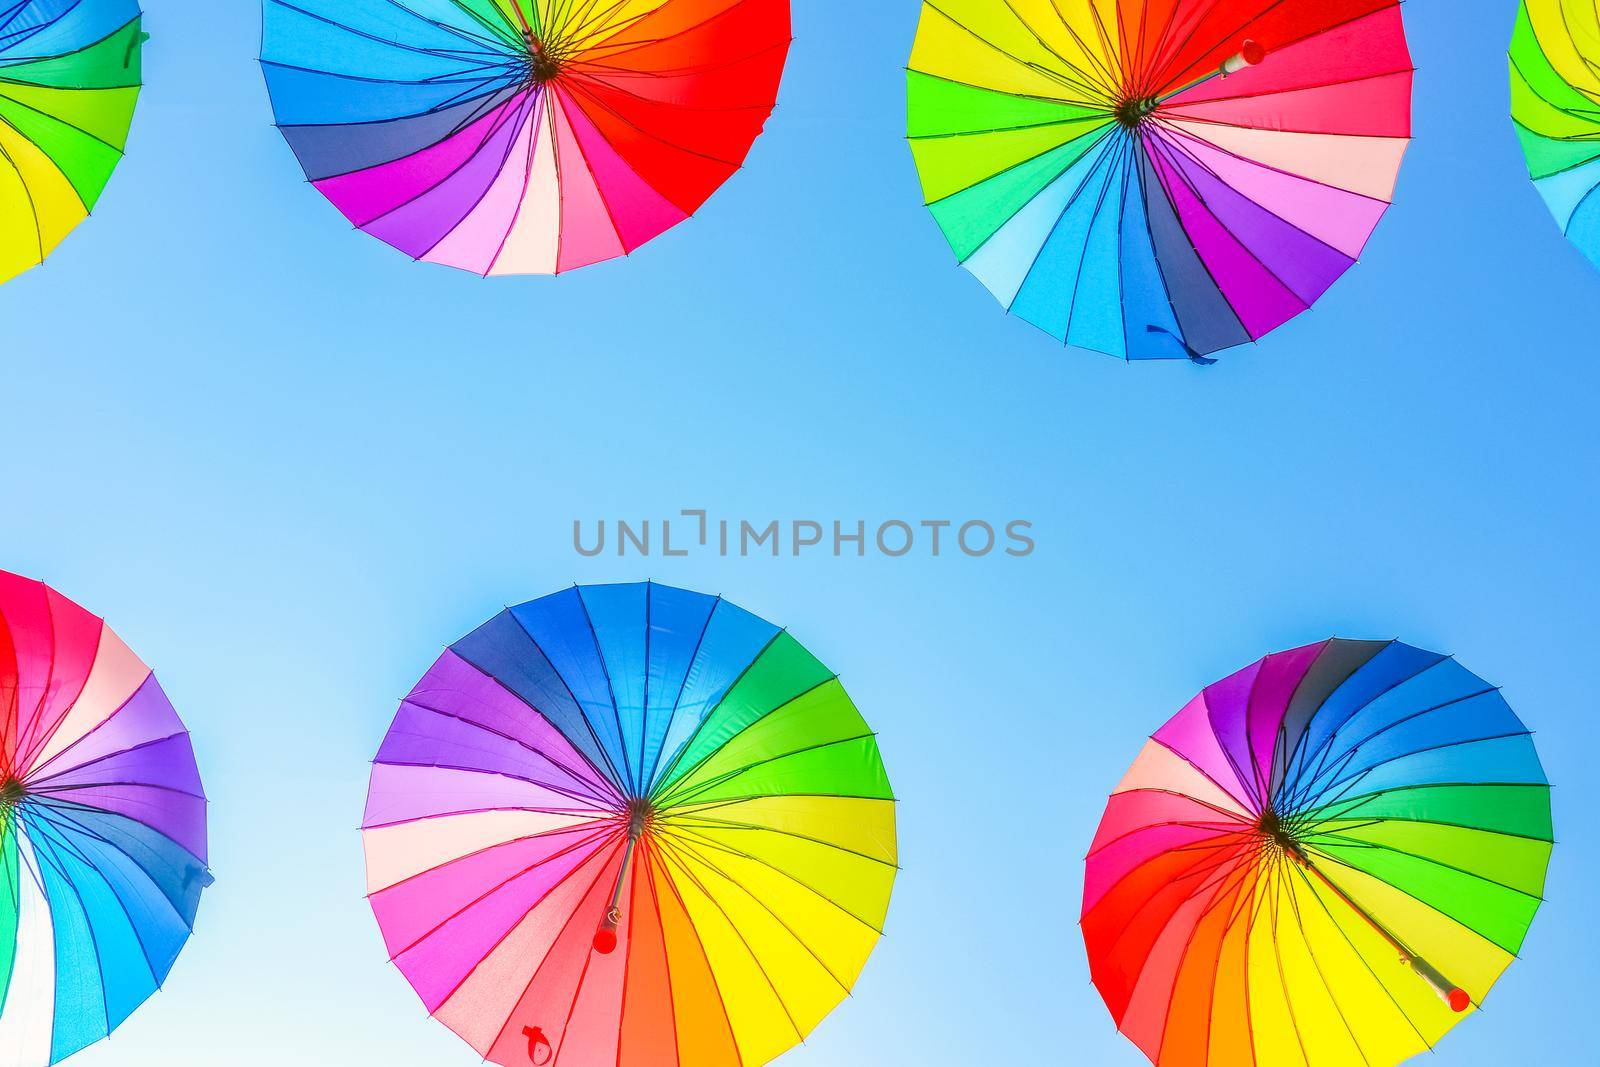 colorful umbrellas against the blue sky by roman112007